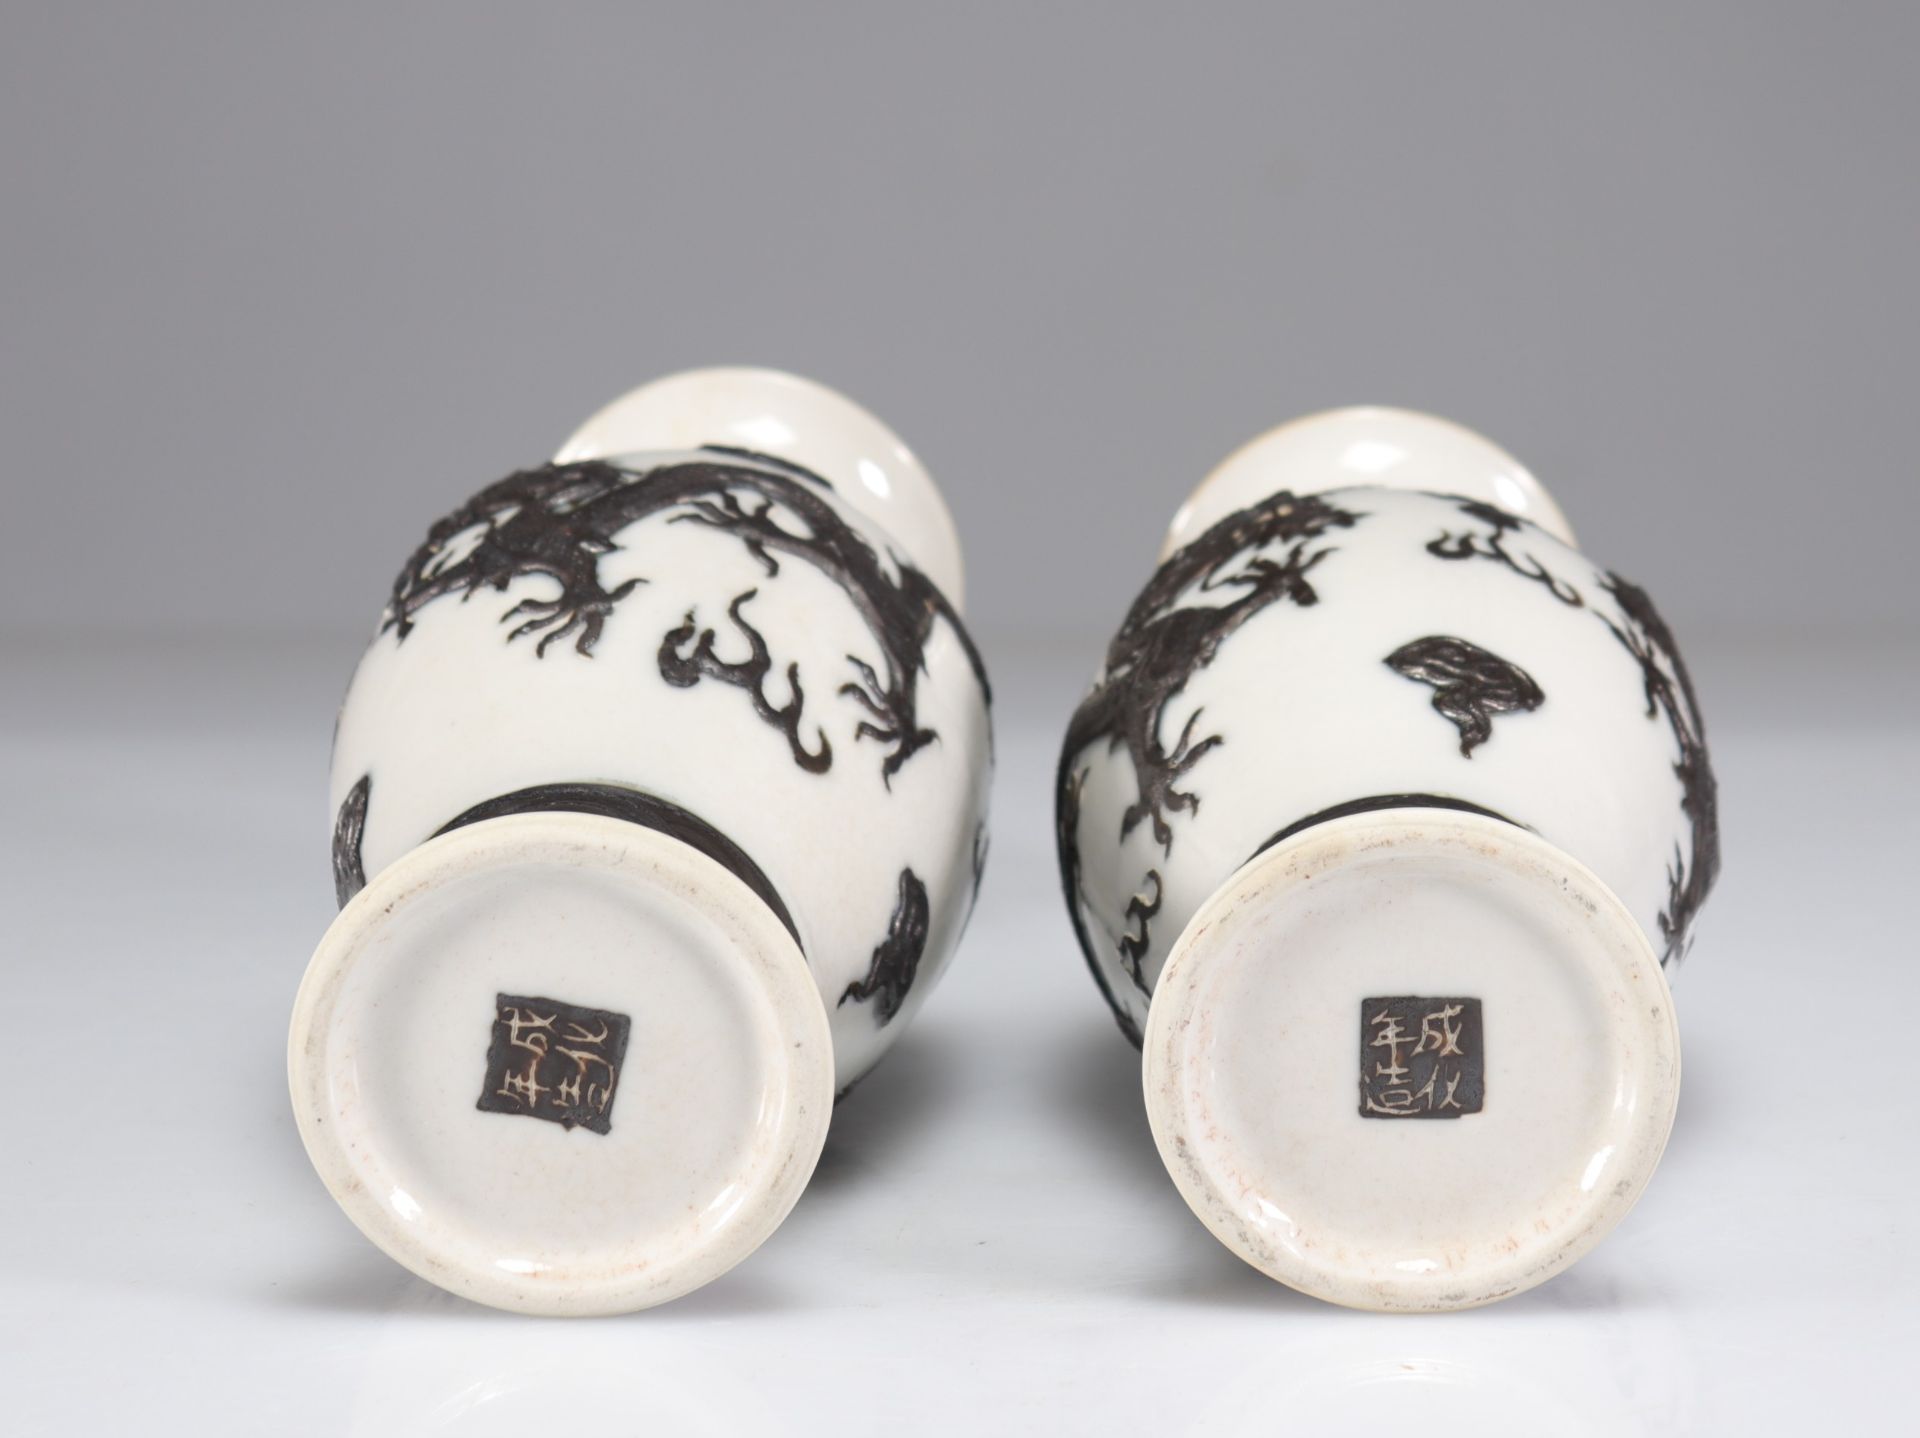 Pair of Nanjing vases decorated with dragons - Image 5 of 5